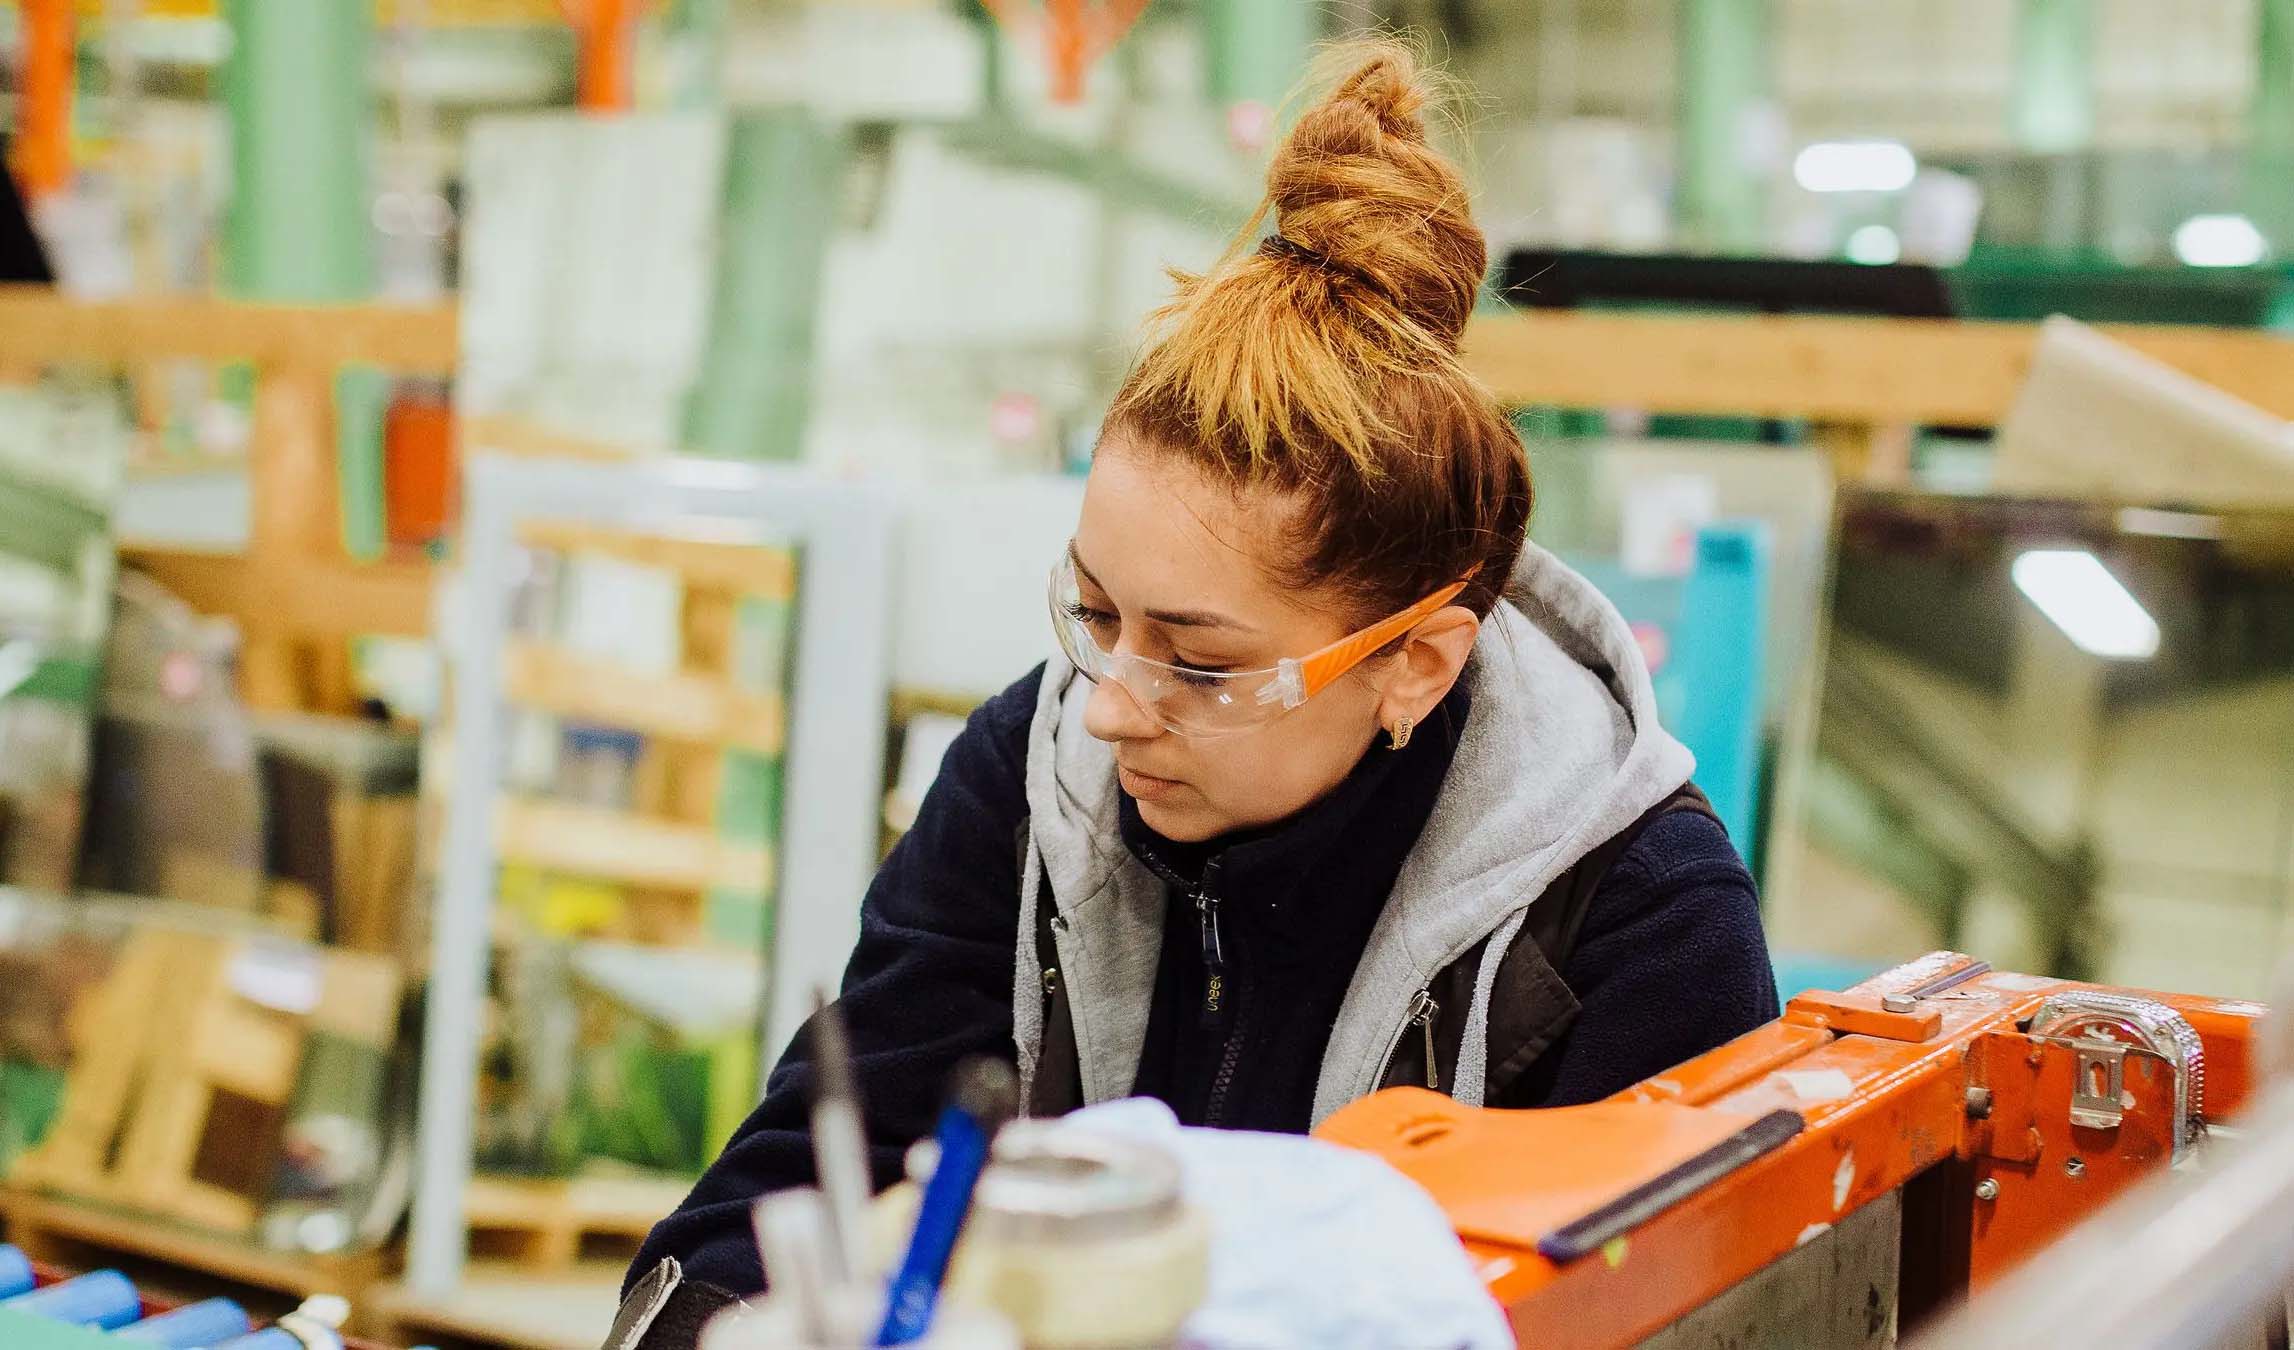 Woman wearing safety goggles in a workshop.